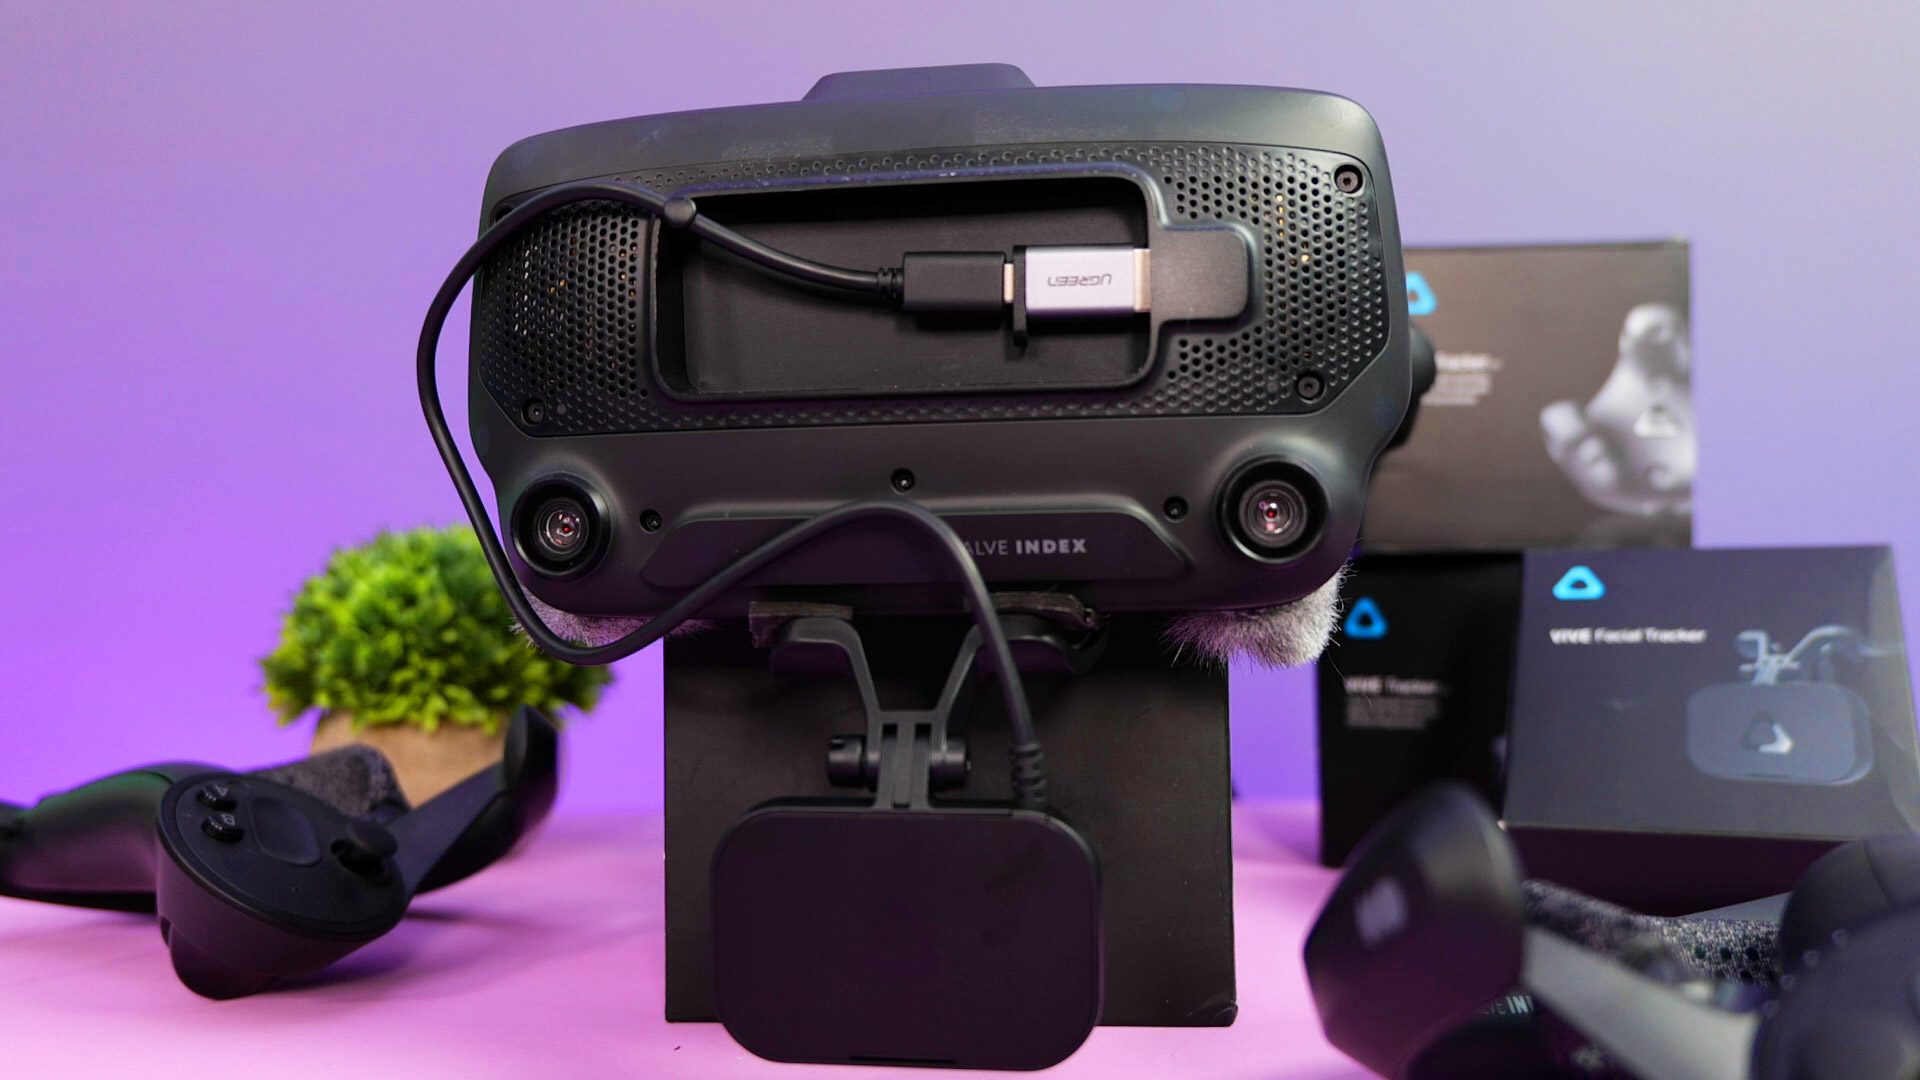 Though the device is designed to mount to the Vive Pro, it turns out it’s t...